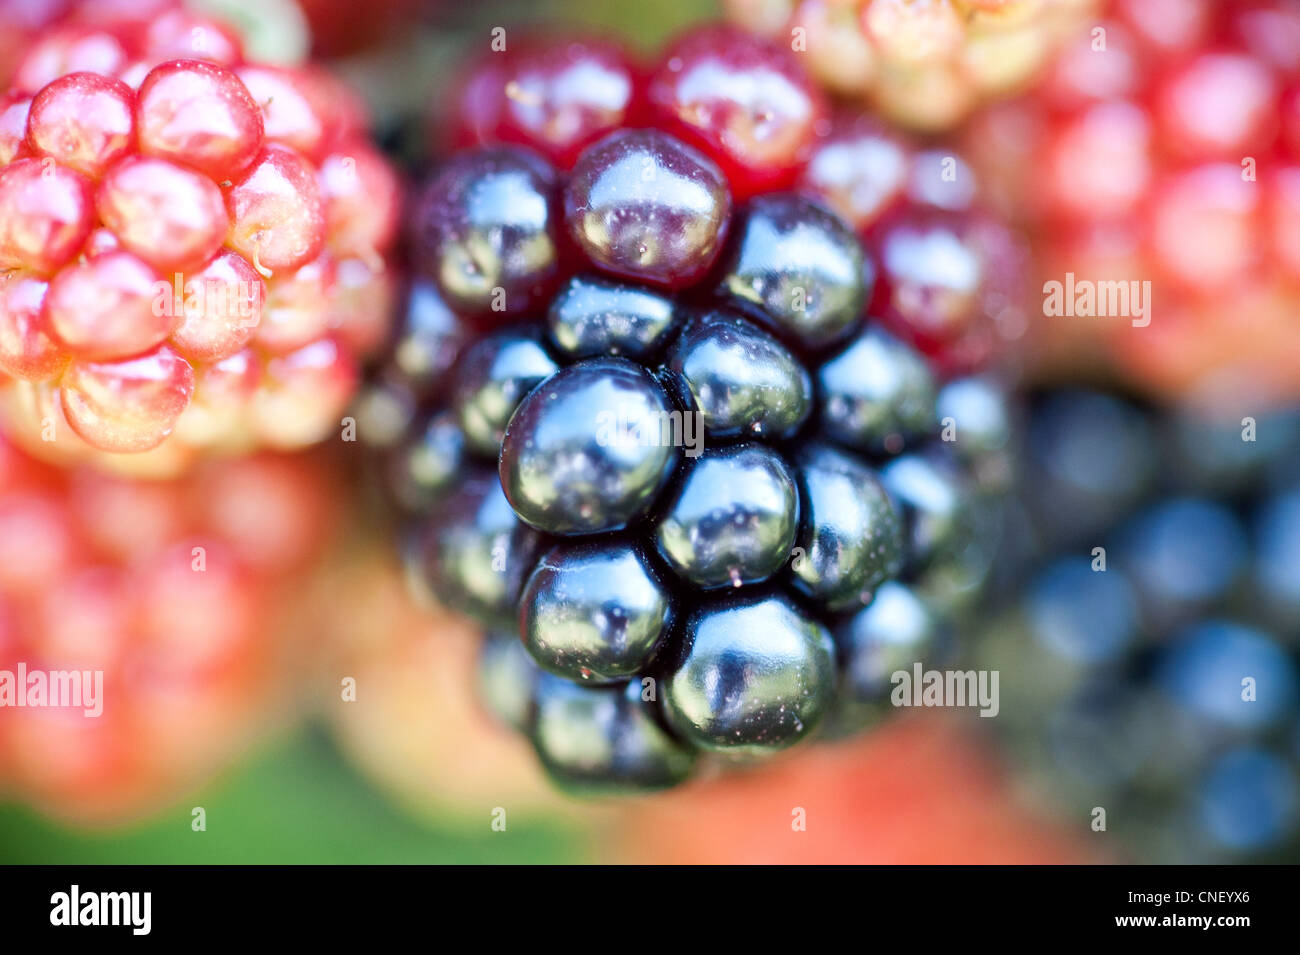 Colorful berries in different stages of ripeness. Stock Photo